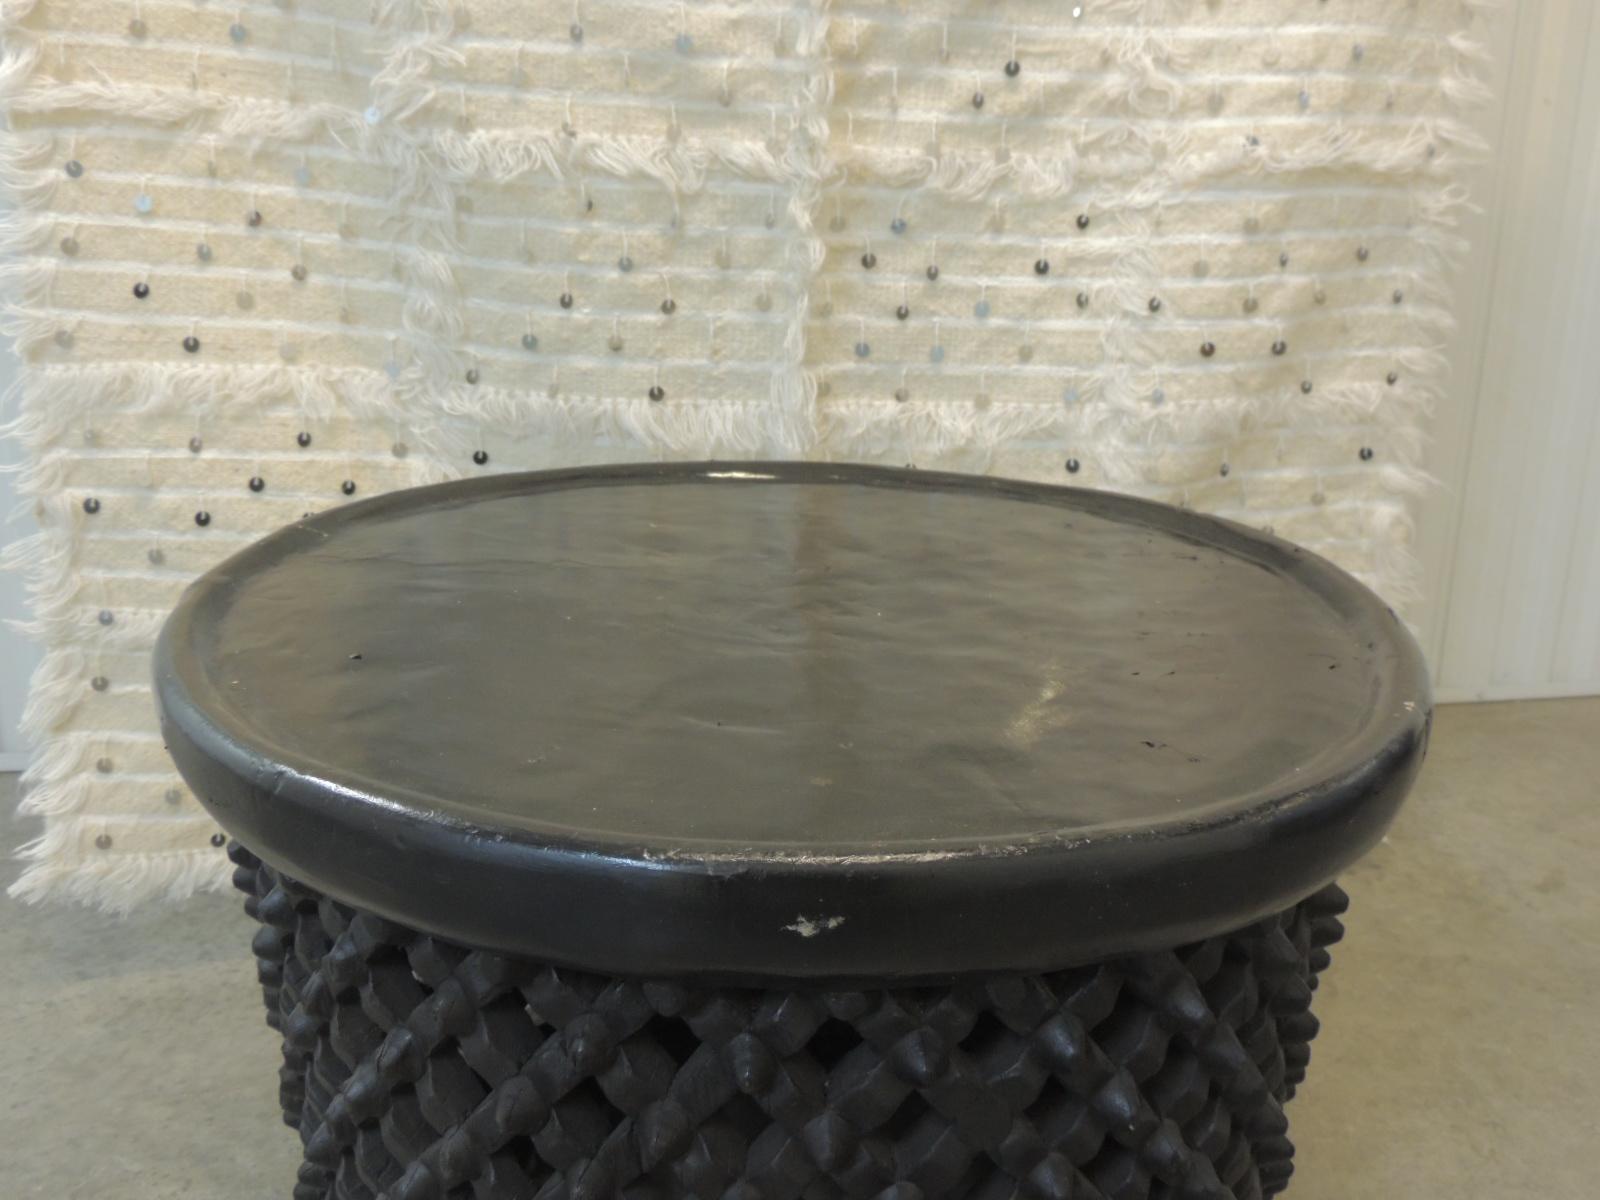 Vintage round black hand carved African round coffee table.
African table from the Bemileke tribe of Cameroon.
Can be use as a Drum table, side table, ottoman.
Hand-carved lattice work in the center, rounded edges.
Size: 23.5 